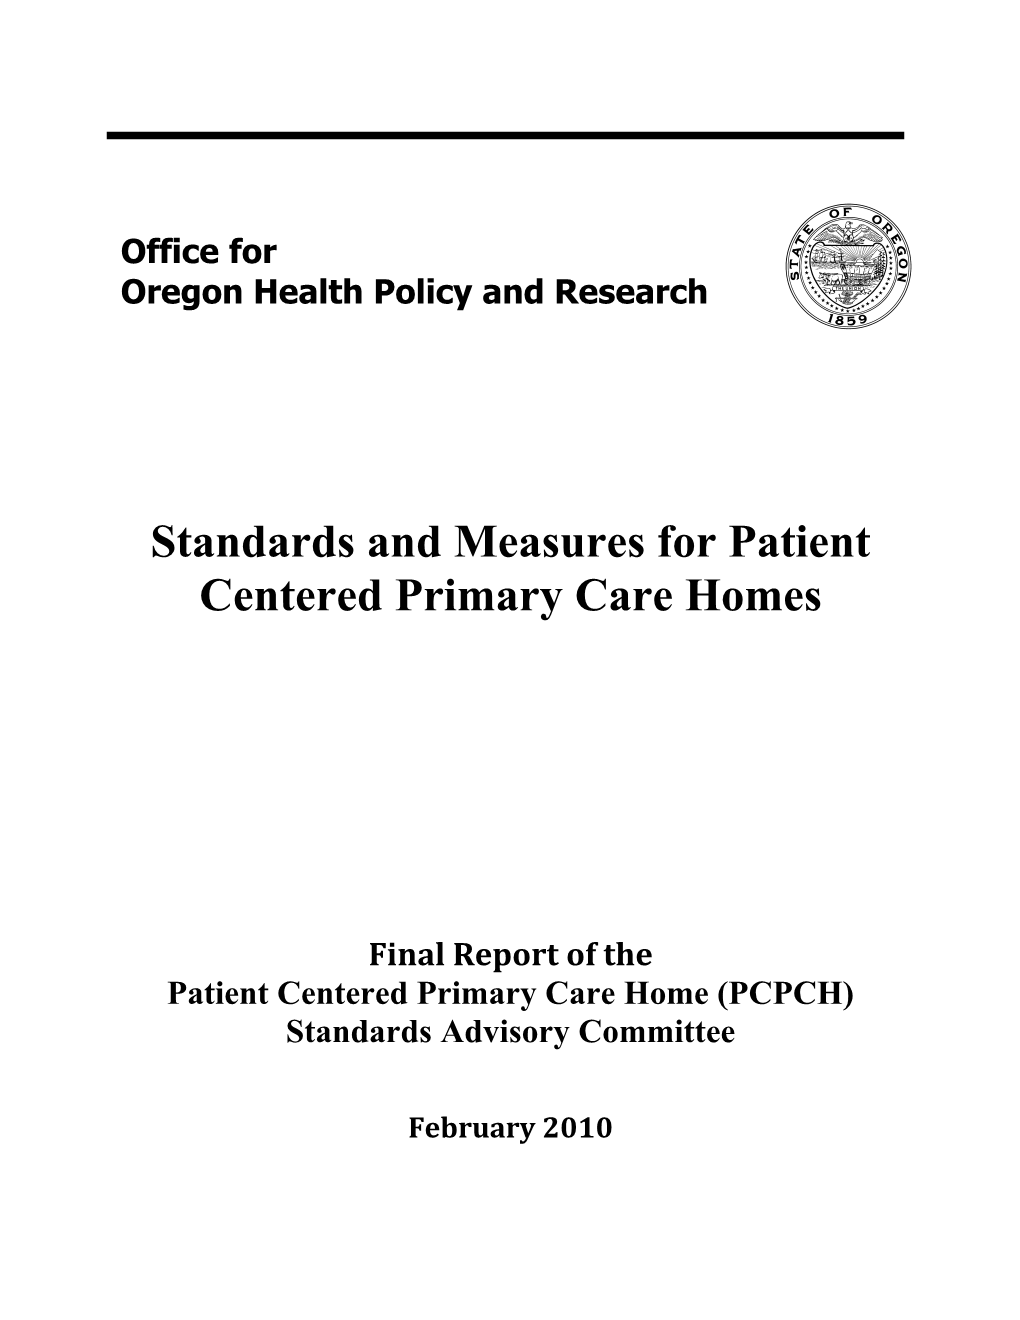 Standards and Measures for Patient Centered Primary Care Homes